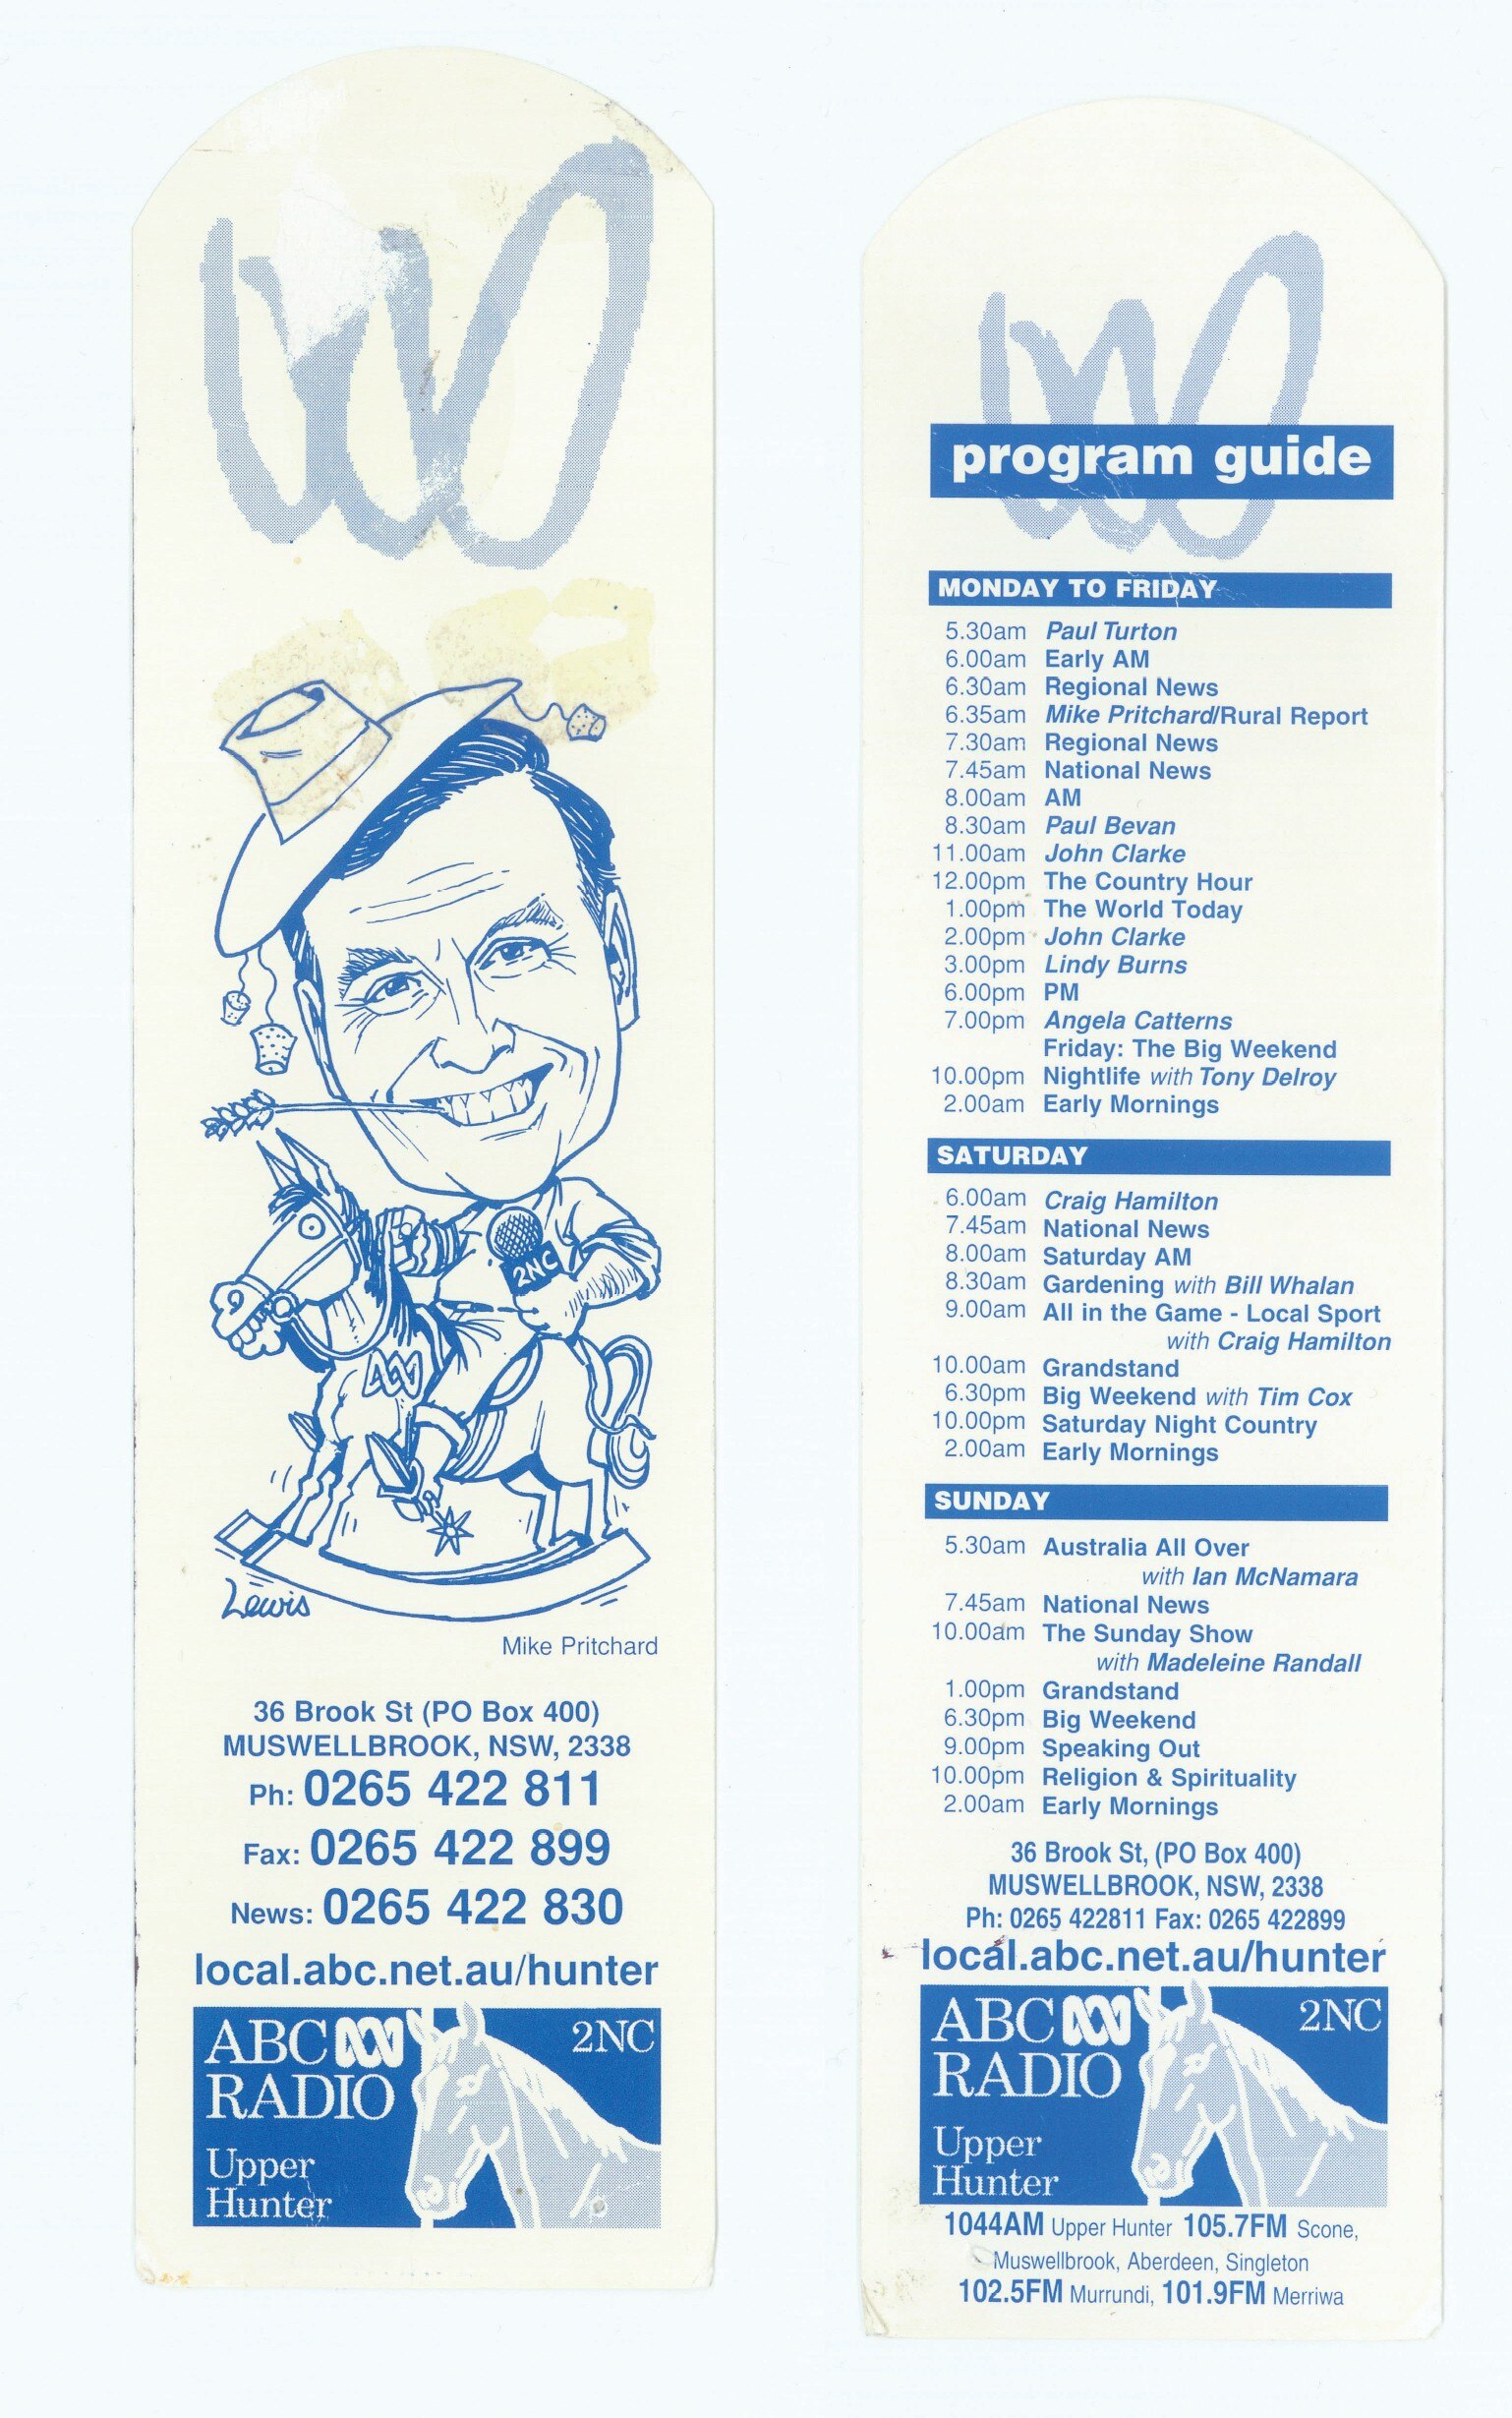 Bookmark showing ABC Upper Hunter program guide and cartoon of Pritchard wearing Akubra at and riding a rocking horse.